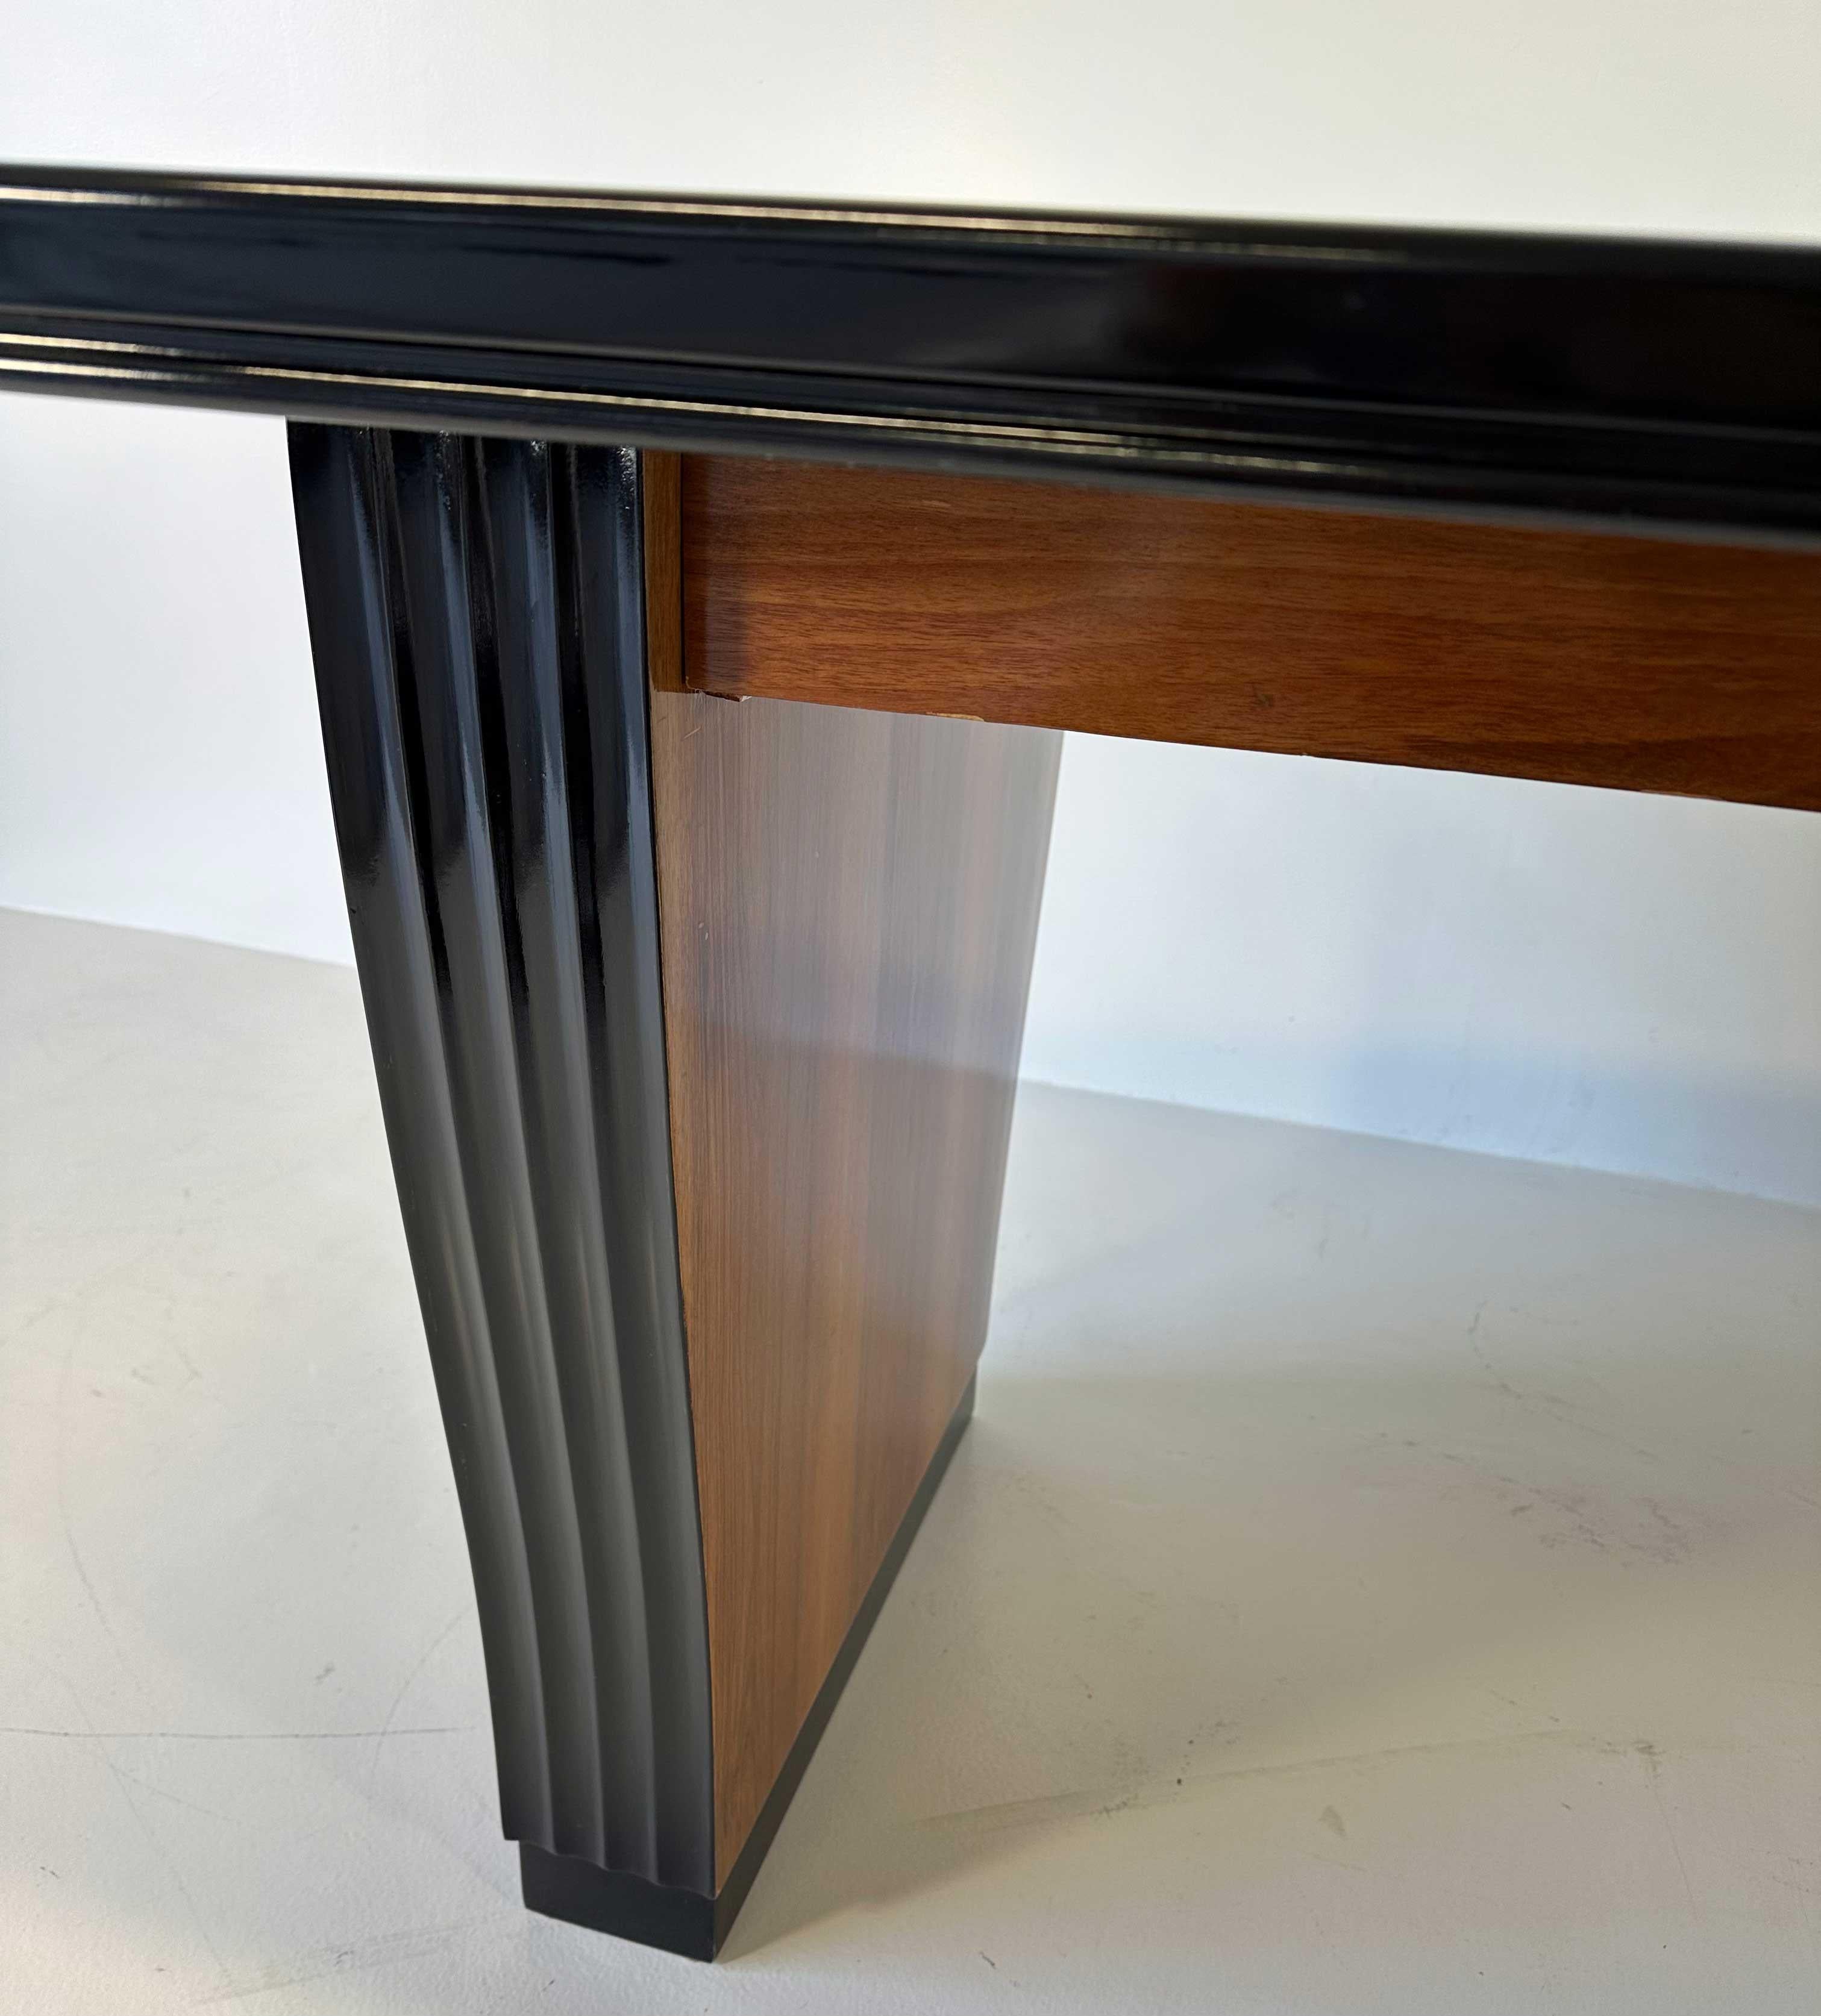 Italian Art Deco Walnut and Black Lacquer Table, 1930s For Sale 4